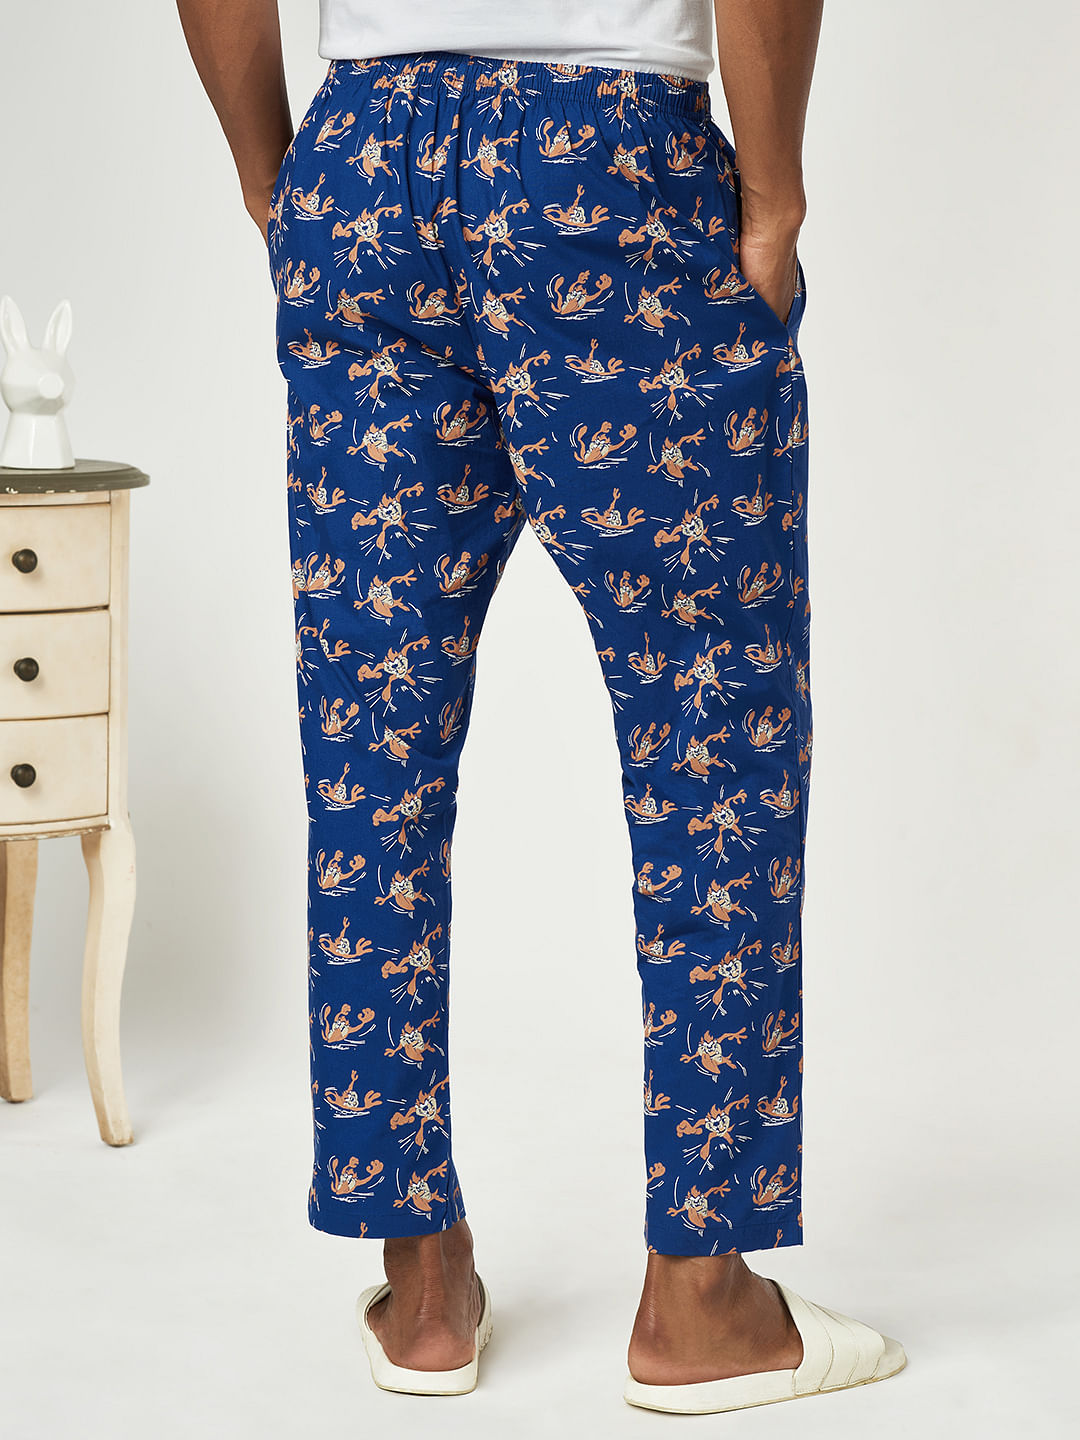 Buy Looney Tunes Doodle Pajamas at The Souled Store.